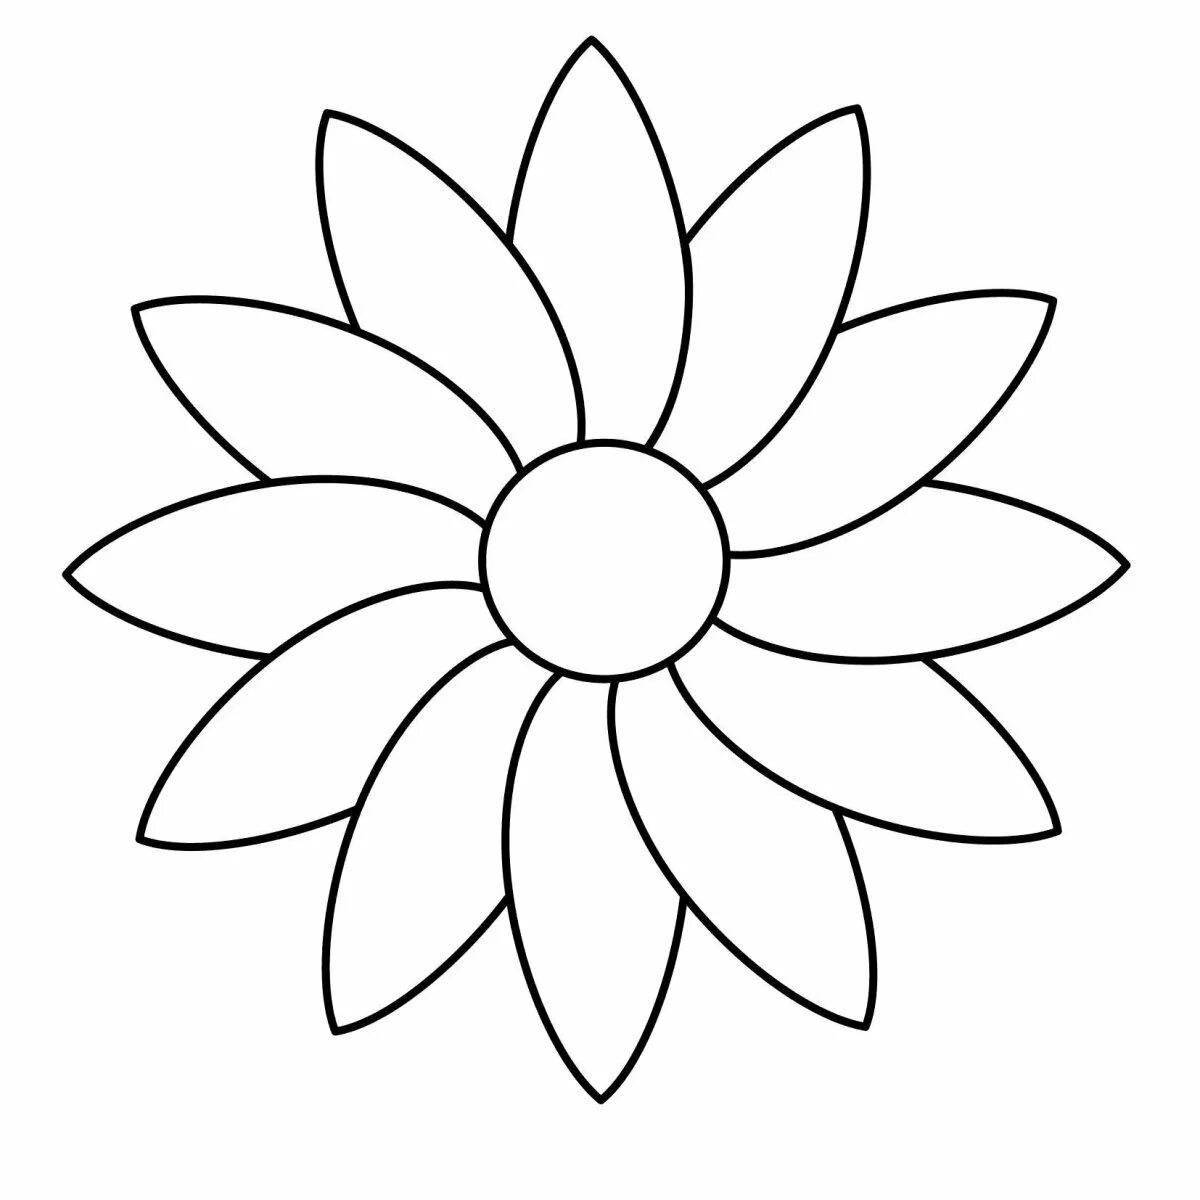 Fun flower drawing for kids